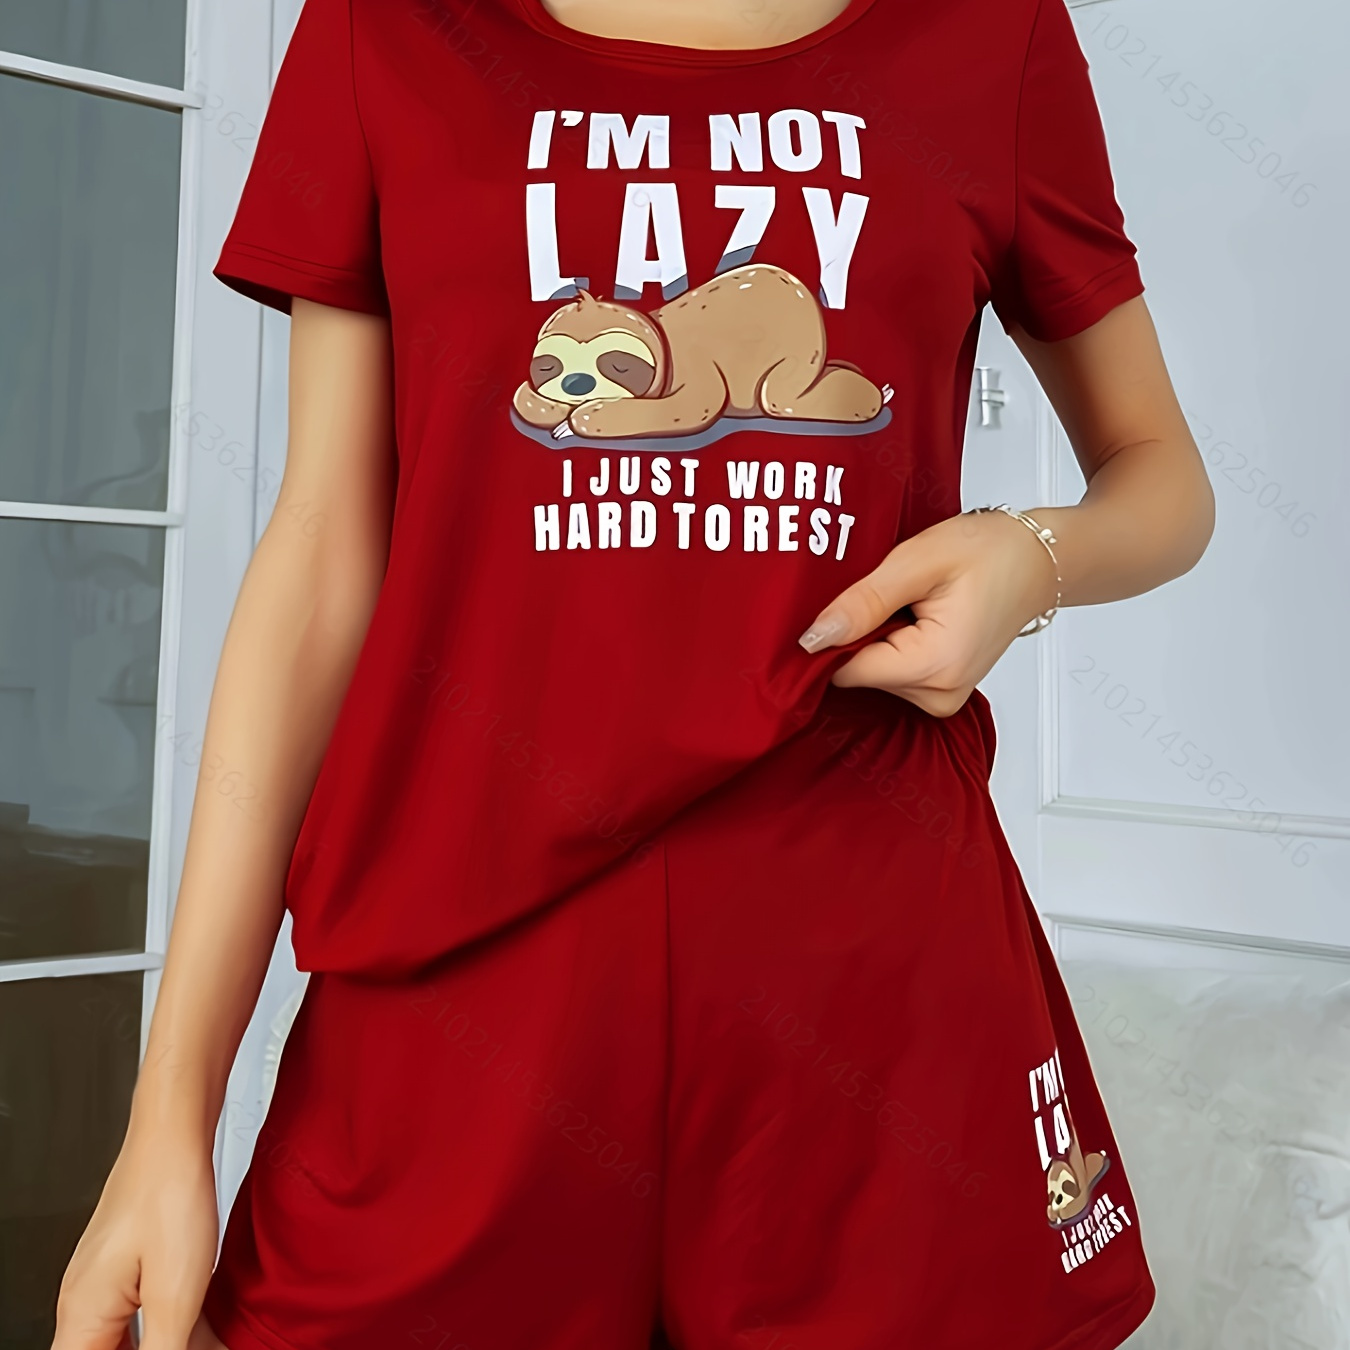 

Women's Cute Sloth & Slogan Print Pajama Set, Short Sleeve Round Neck Top & Shorts, Comfortable Relaxed Fit